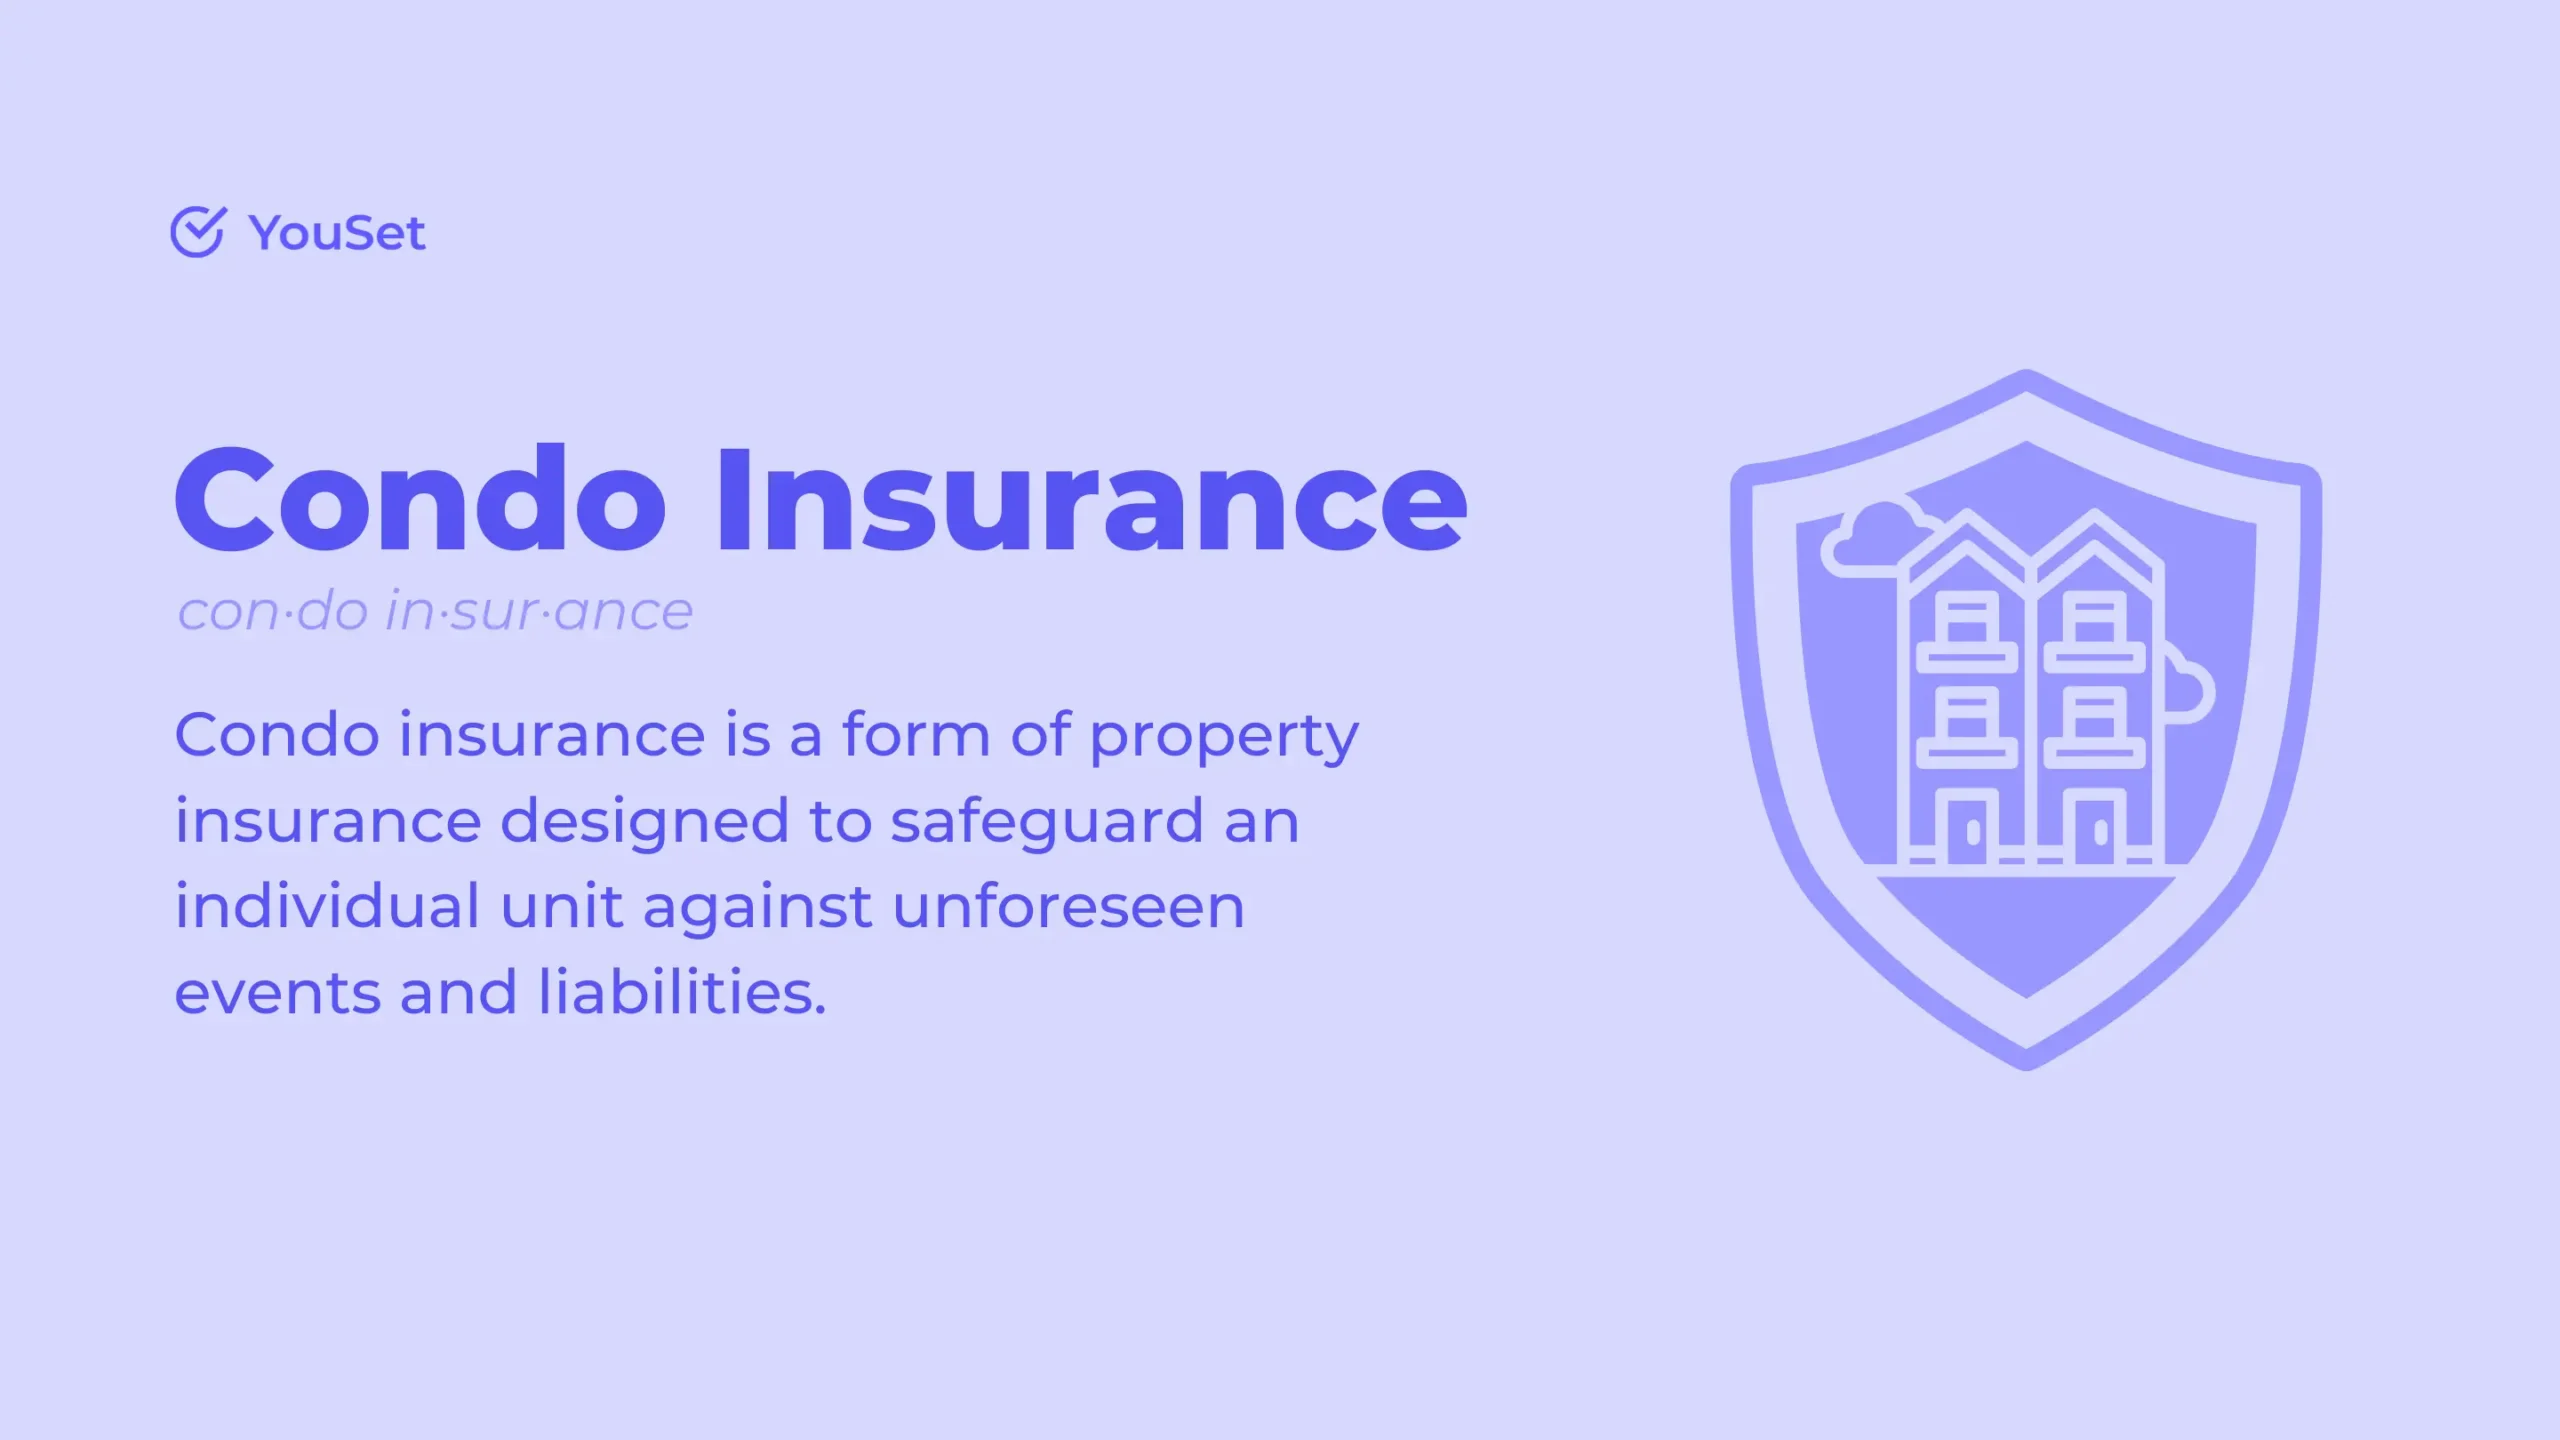 Condo Insurance Definition - YouSet